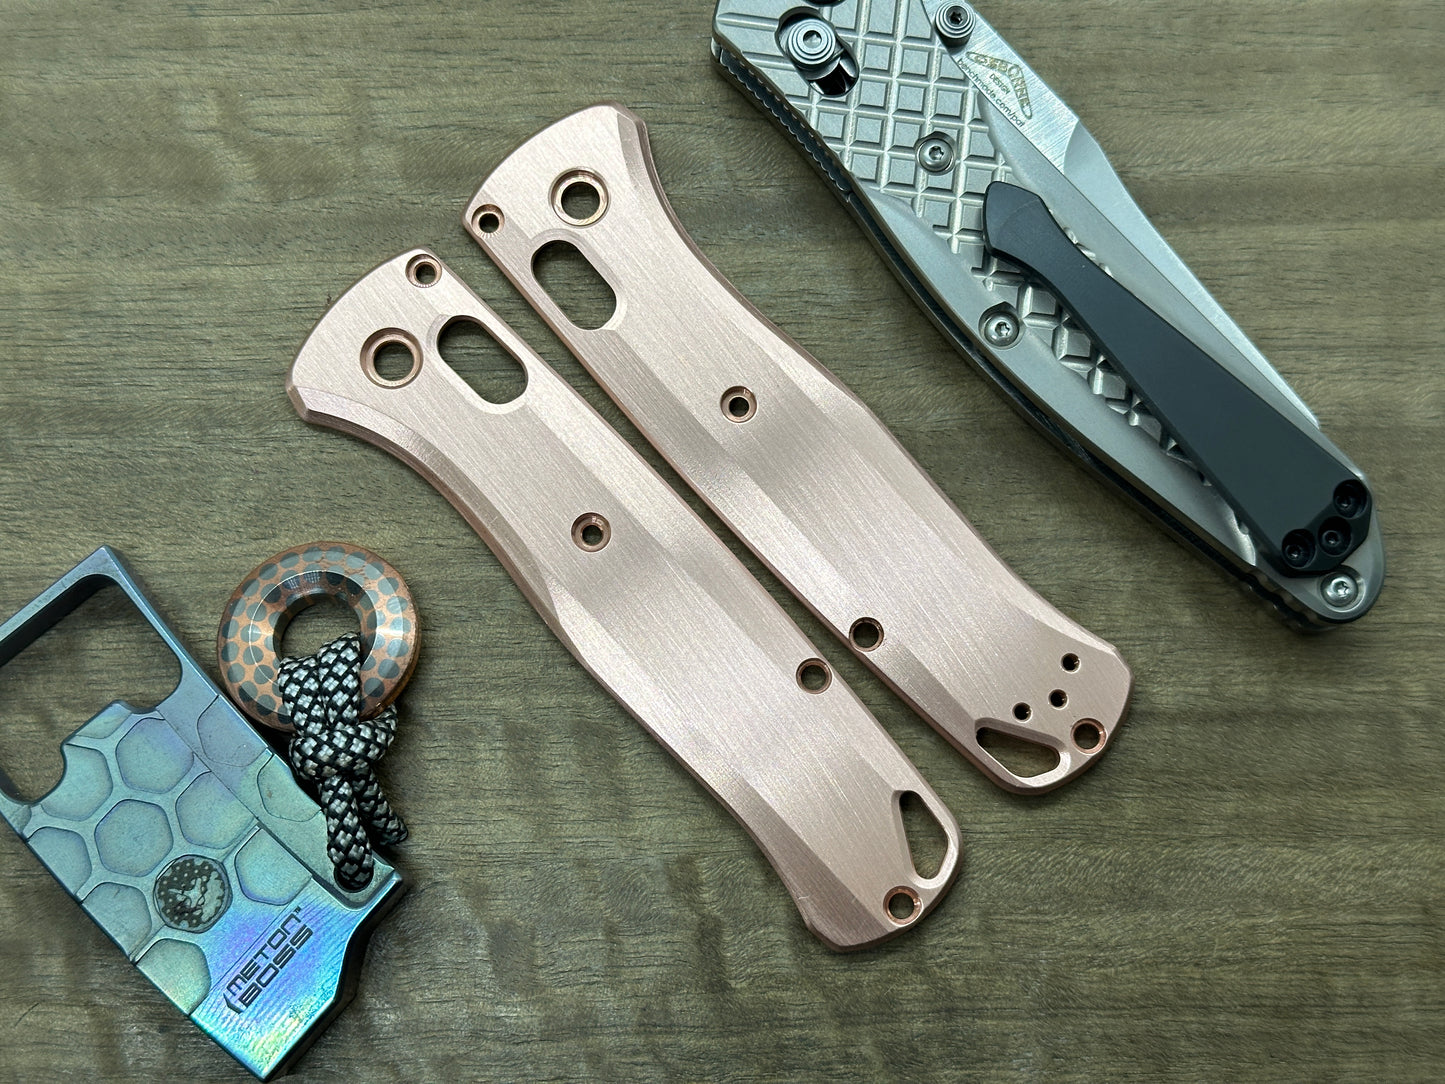 Brushed Copper Scales for Benchmade Bugout 535